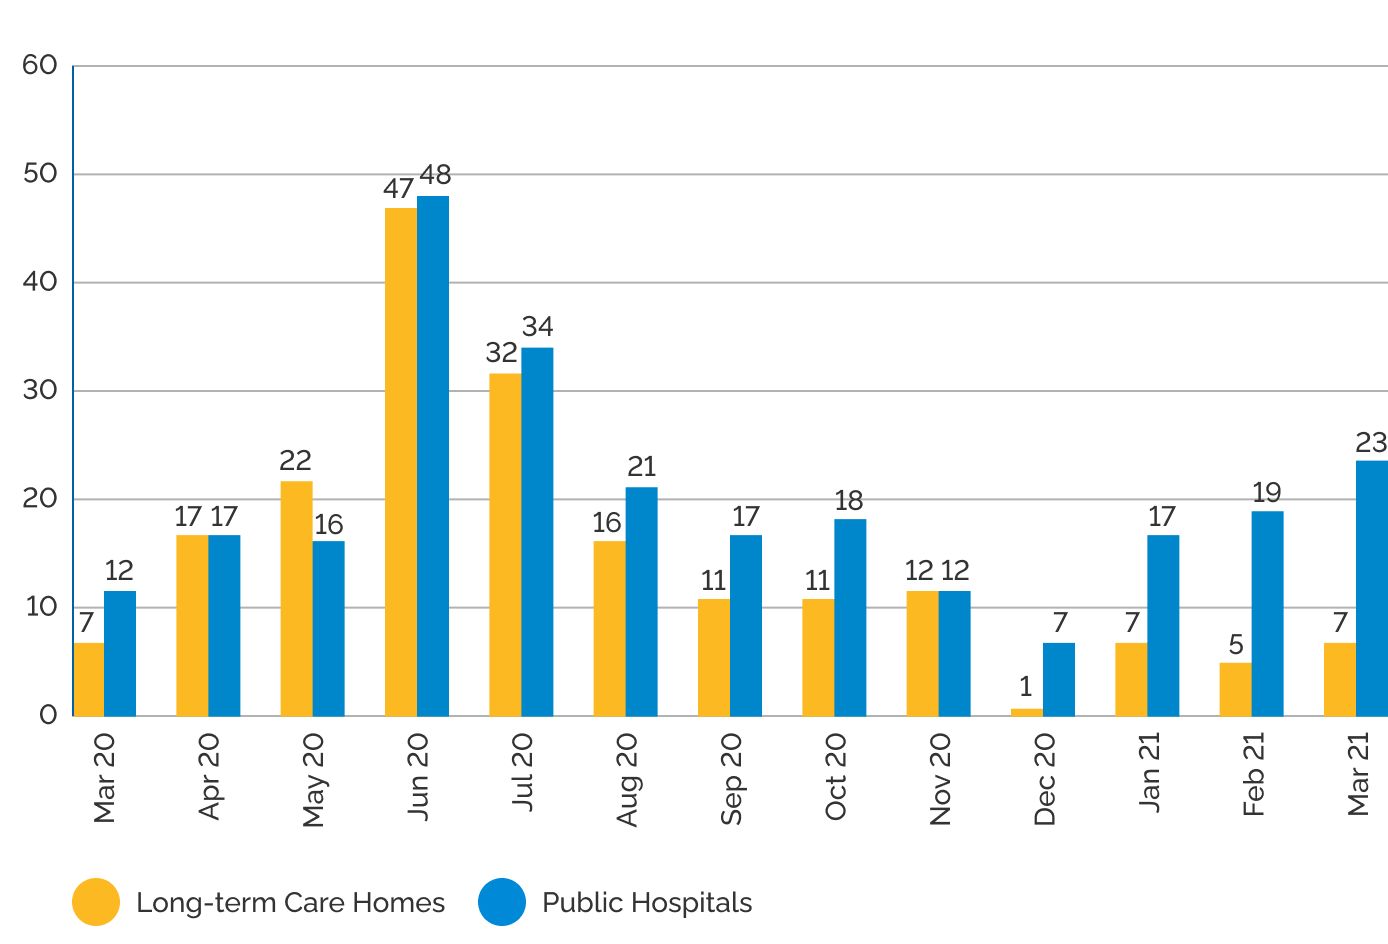 Bar graph showing complaints for Long-term Care Homes and Public Hospitals by the month from March 2020 to March 2021. Complaints peaked May and June 2020.